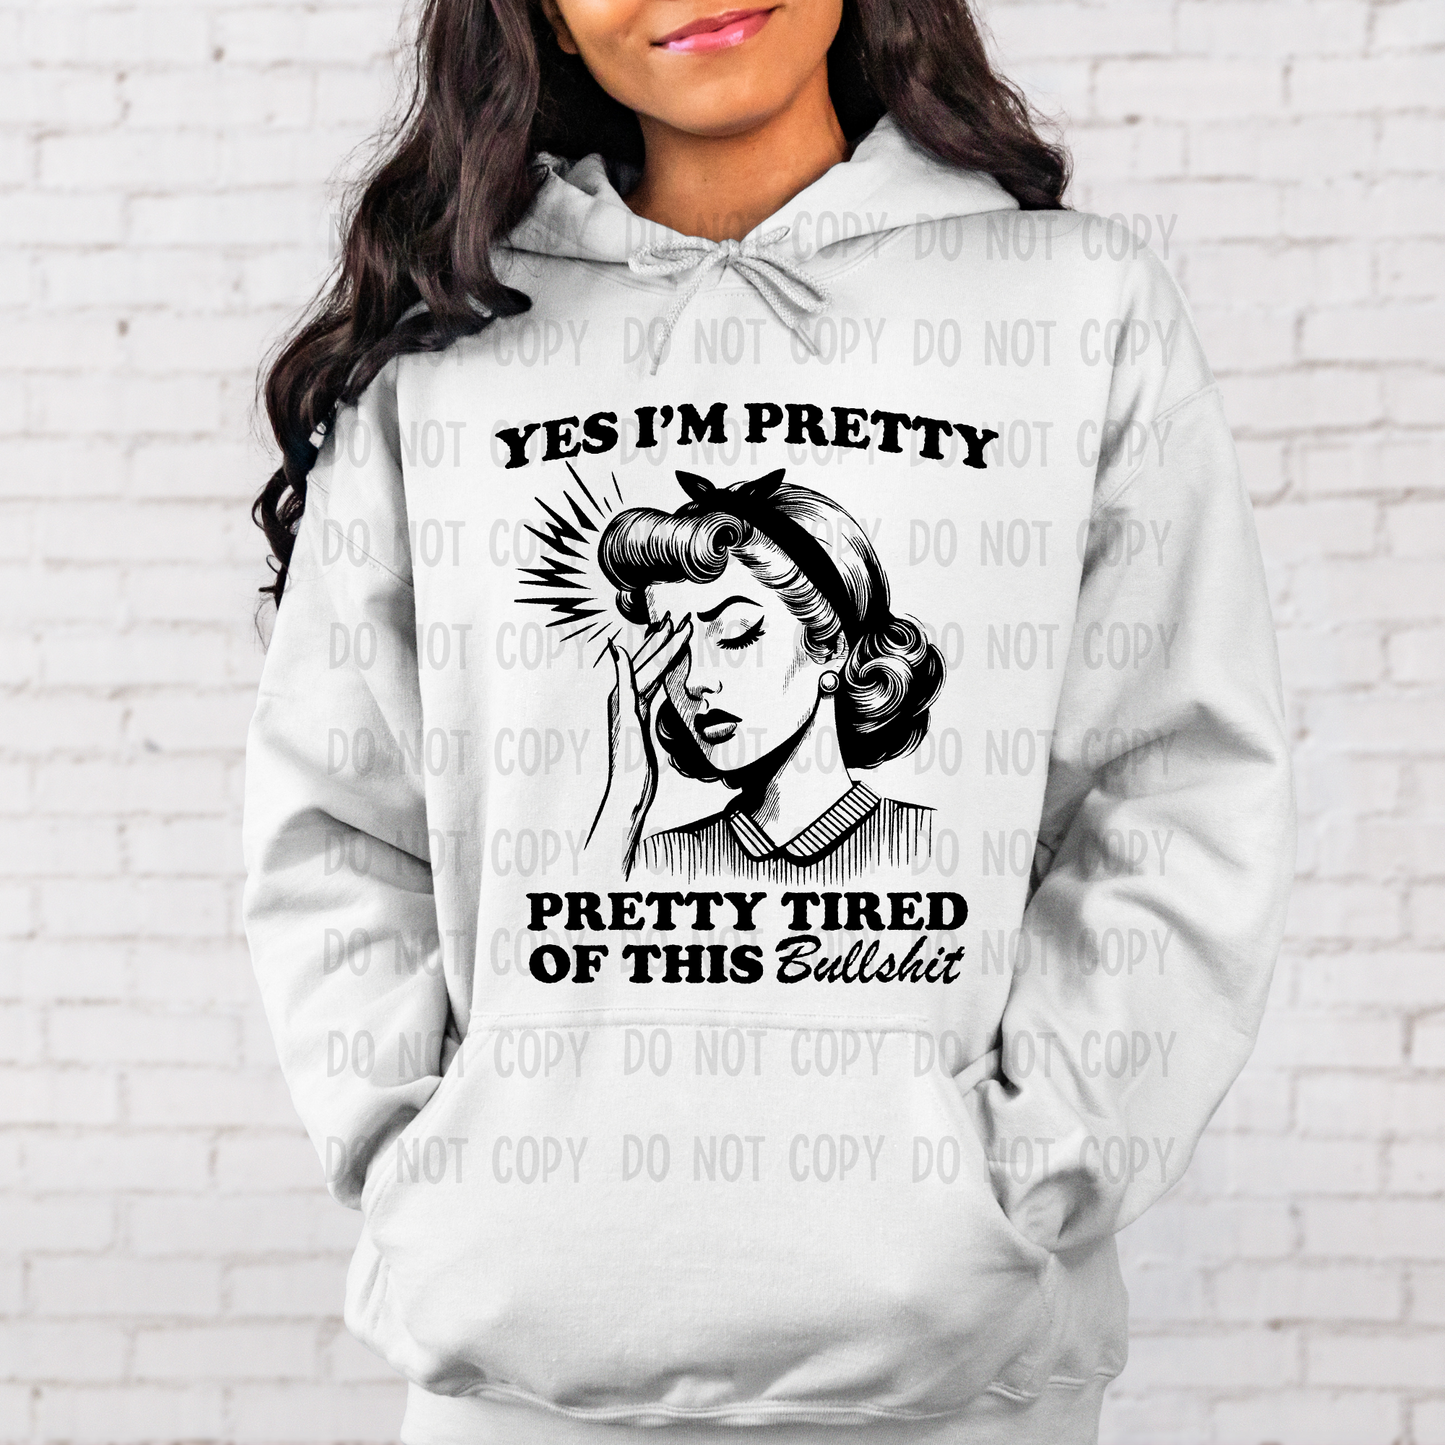 Yes I'm pretty - Sublimation